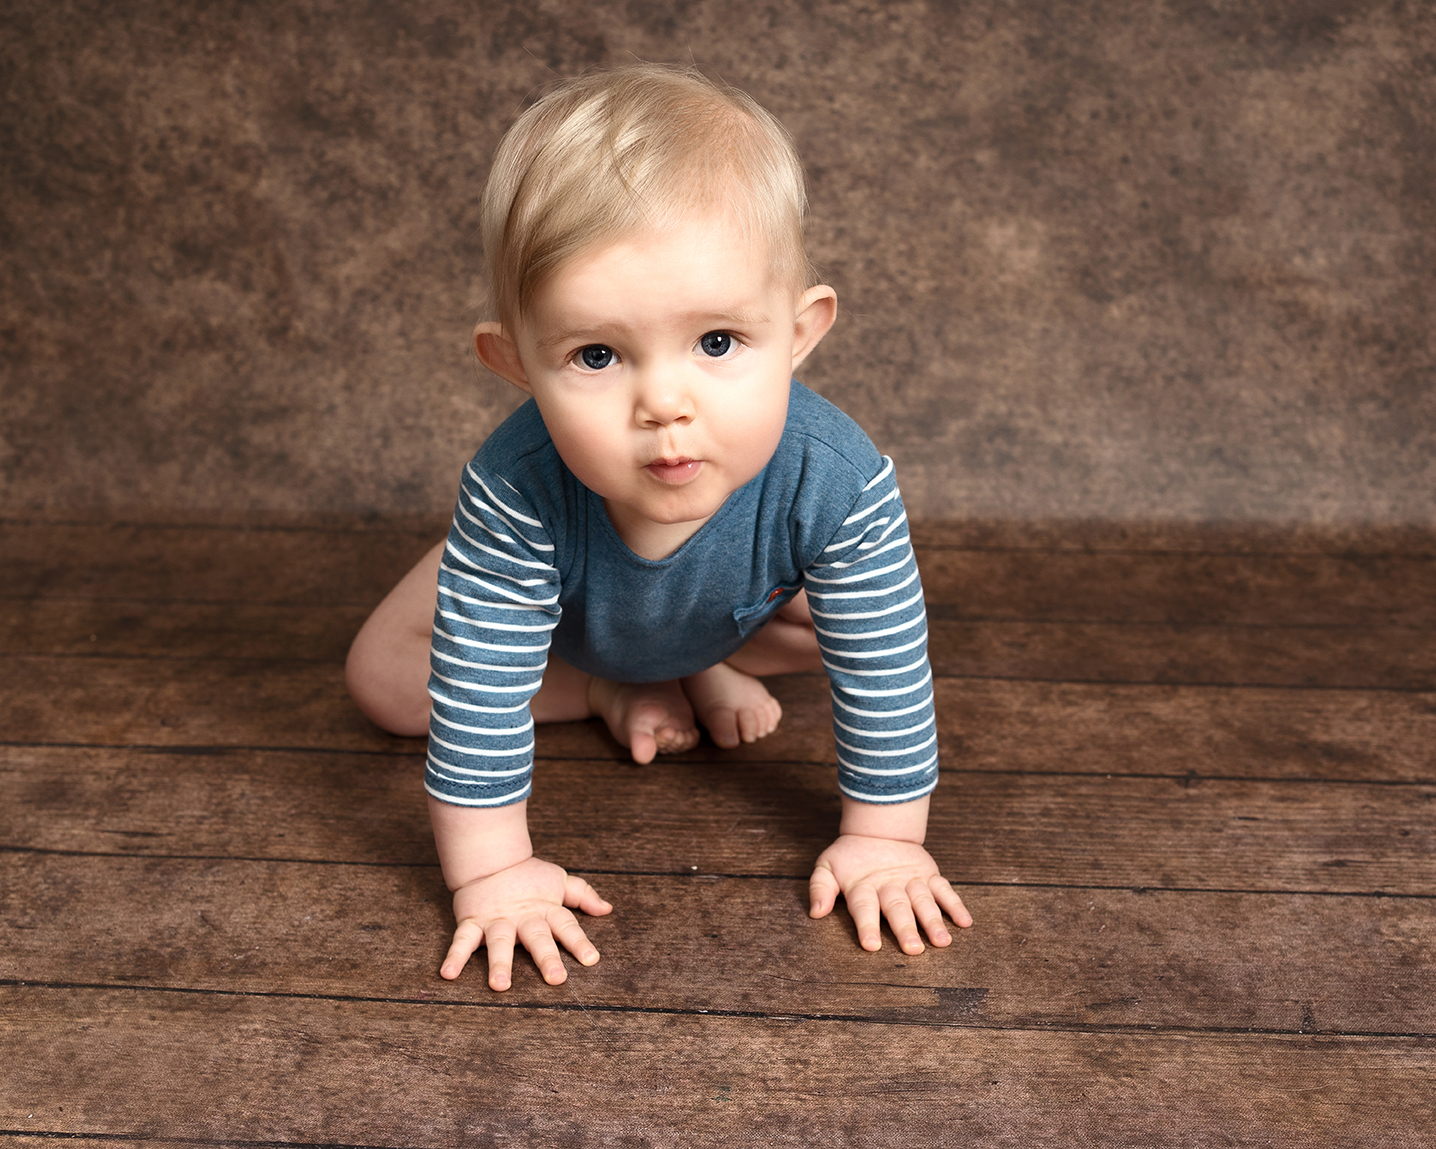 Baby boy about to crawl taken by Alice James Photography